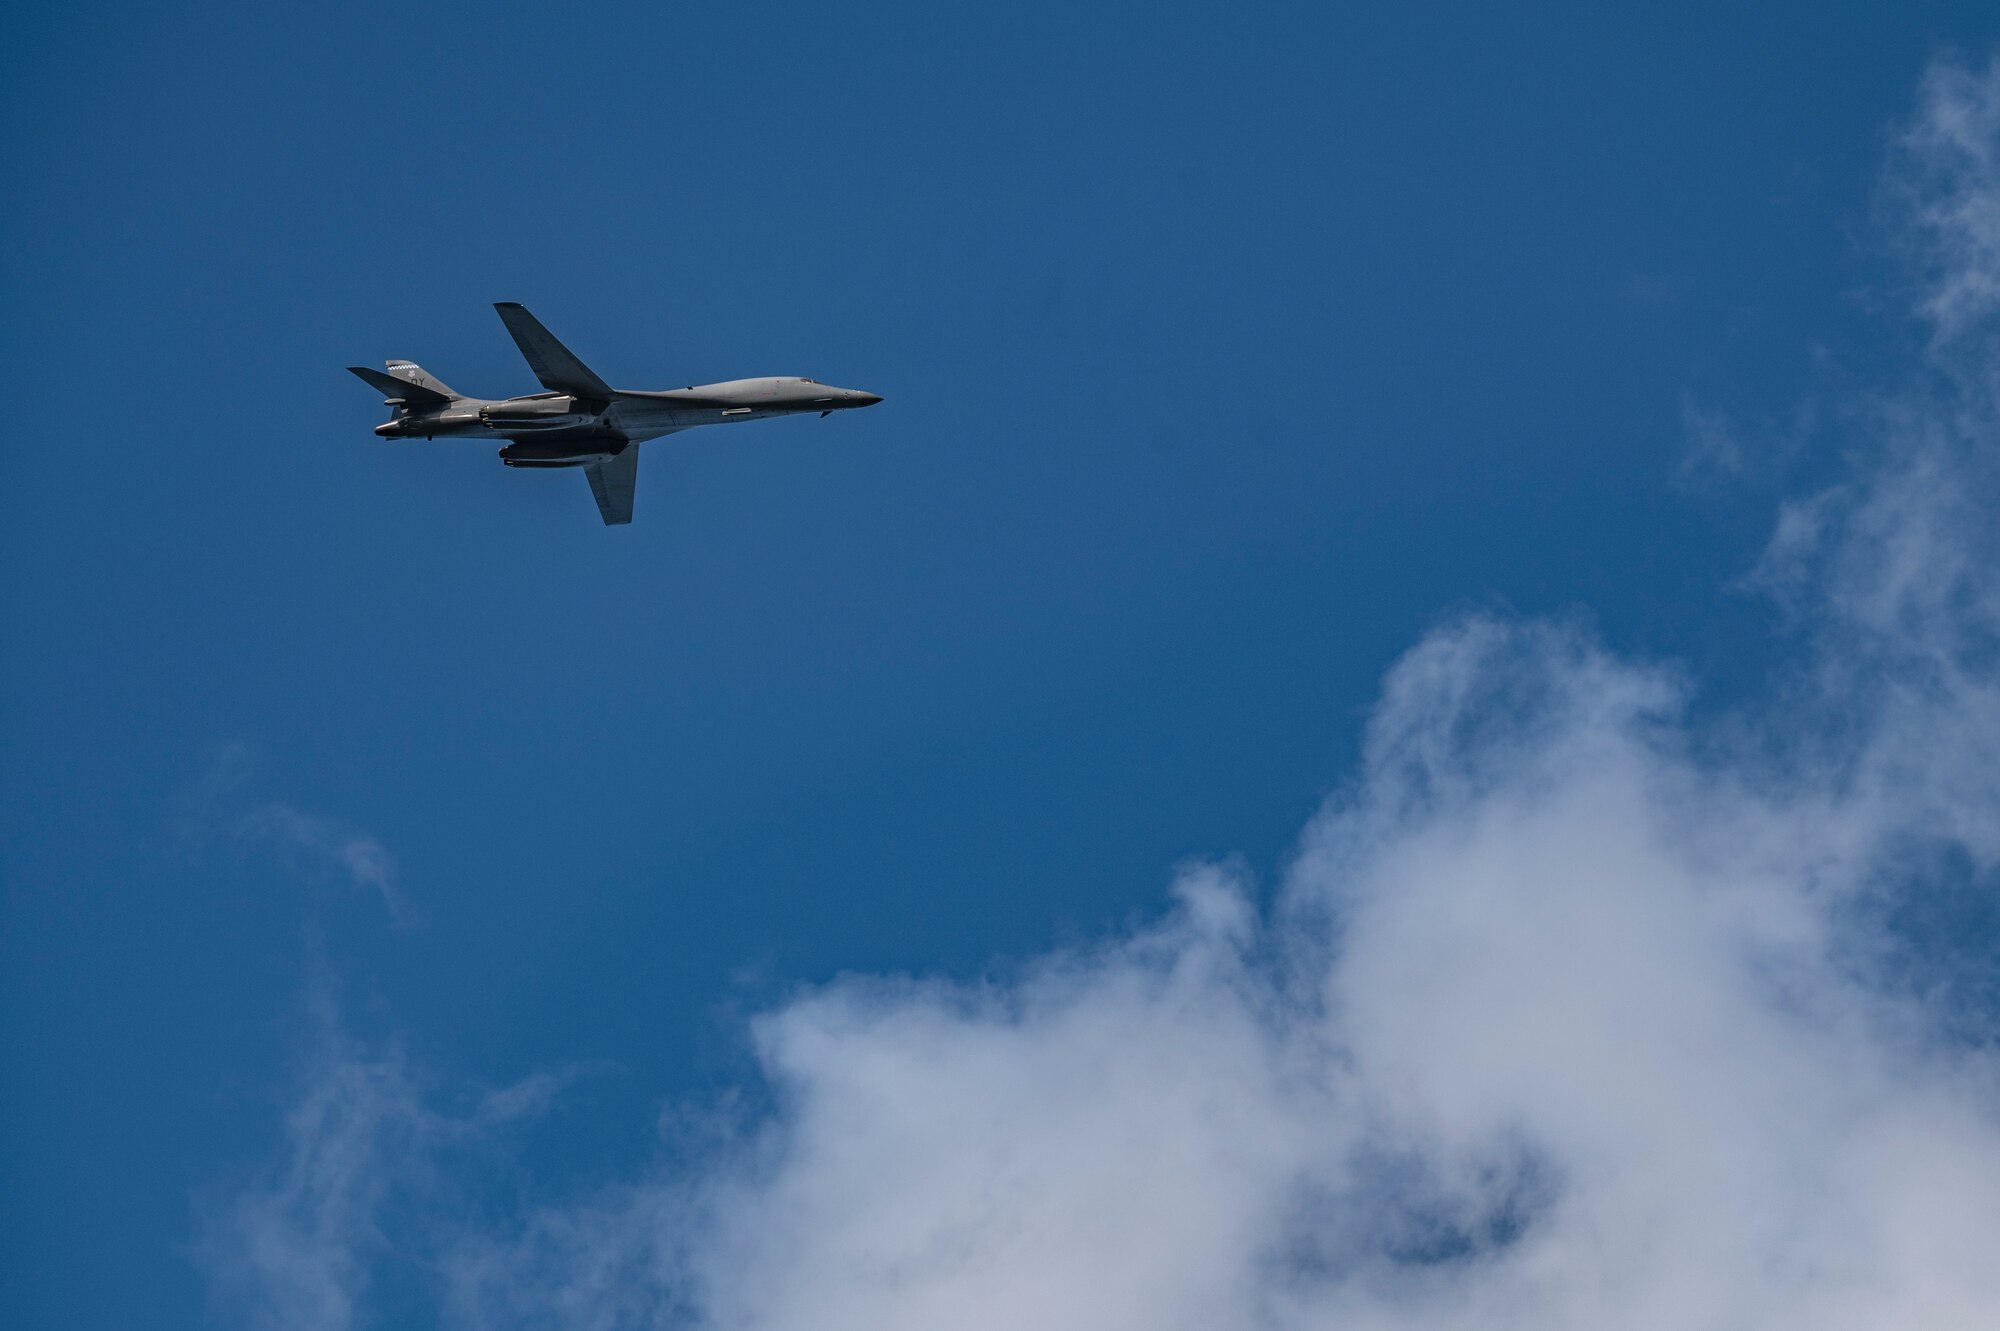 A B-1B Lancers assigned to the 9th Expeditionary Bomb Squadron flies over RAF Fairford, United Kingdom, Oct. 24, 2023. Bomber Task Force missions are representative of the U.S. commitment to our Allies and partners and enhance regional security. (U.S. Air Force Photo by Senior Airman Ryan Hayman)